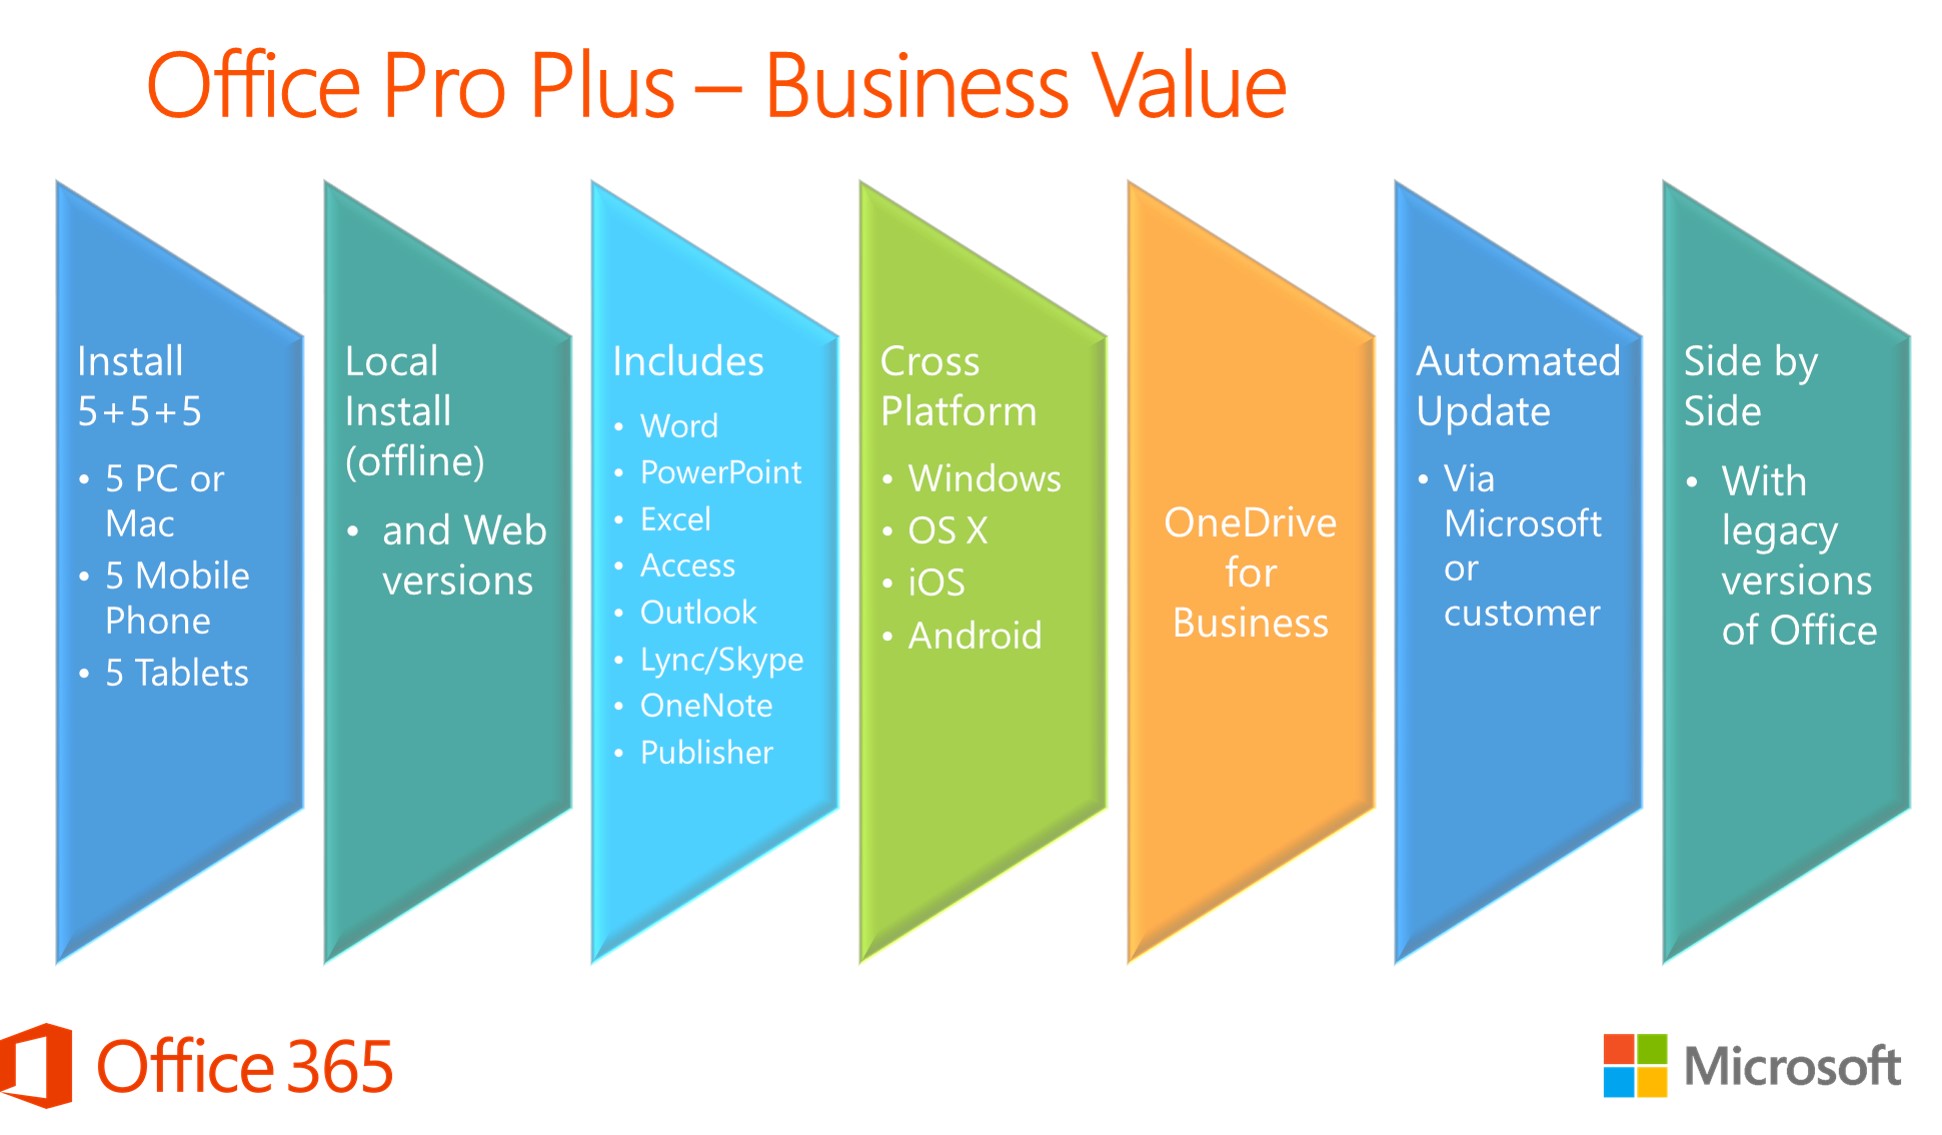 What are the real differences between Office Pro Plus and Office 365 Pro Plus?